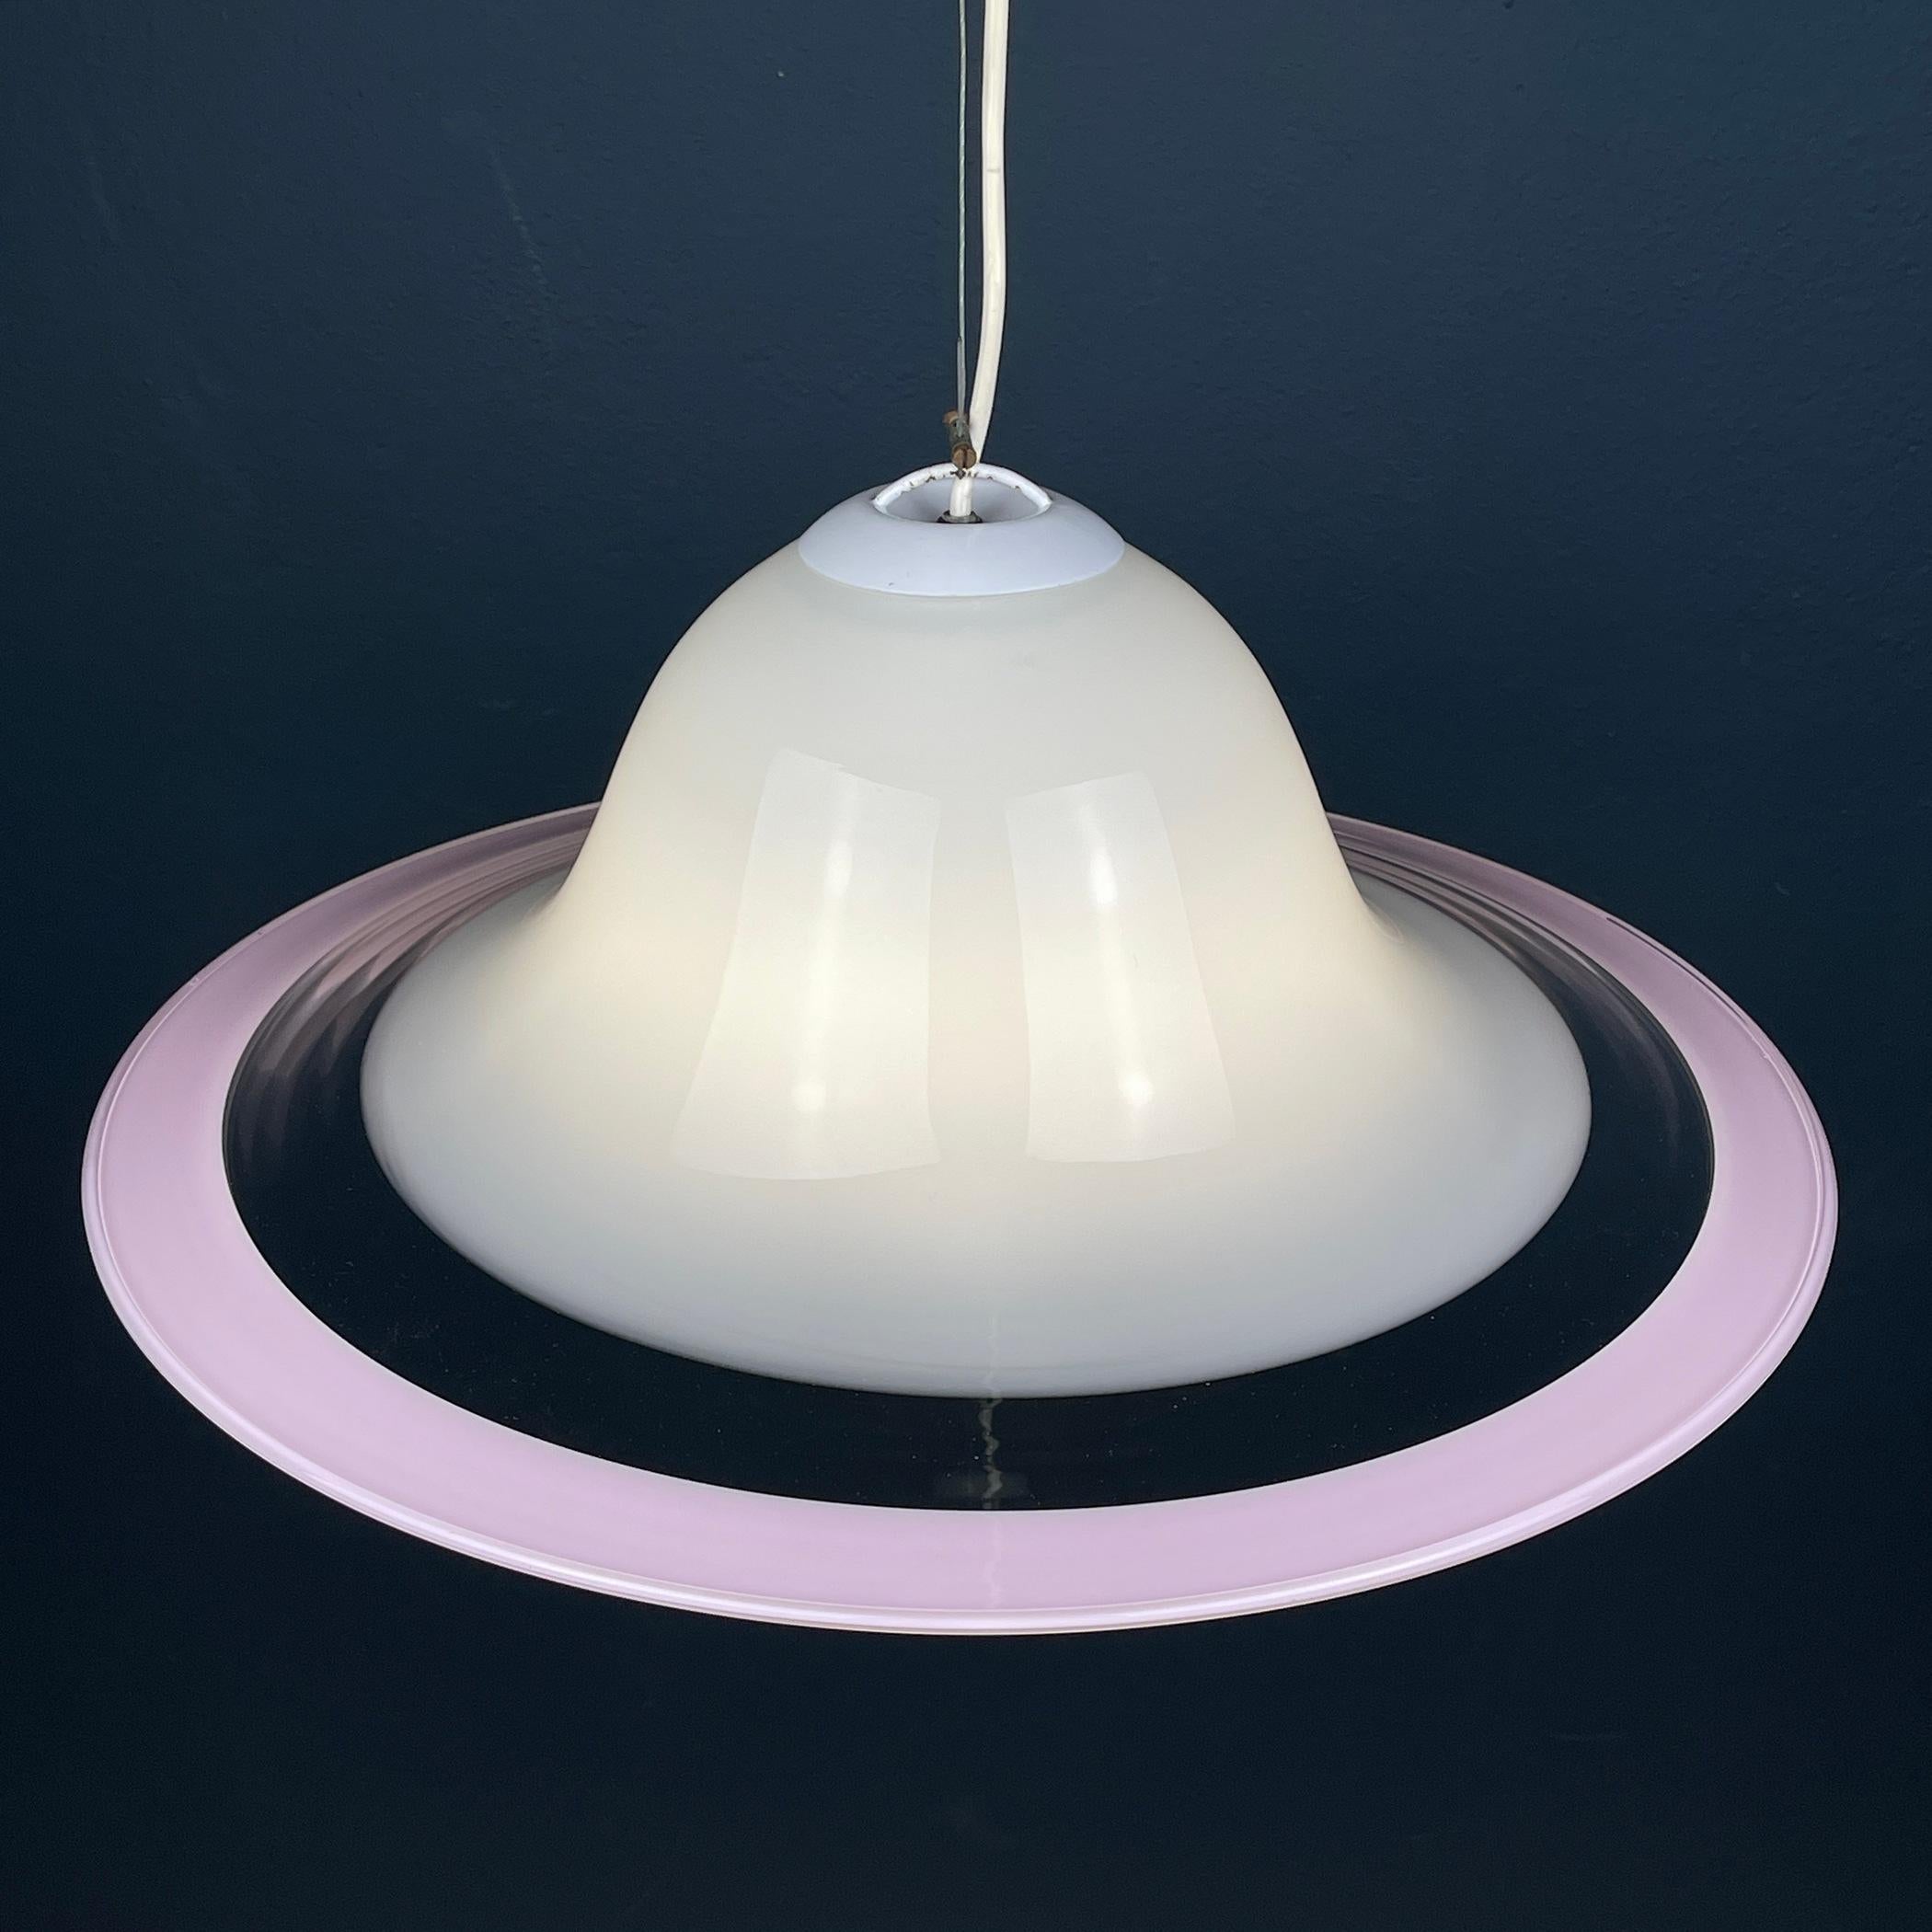 Presenting this stylish and elegant pendant lamp, a classic exemplar of 1970s Italian lighting, crafted from milky white and pink Murano glass in Italy. In excellent vintage condition, this pendant lamp exudes timeless charm and sophistication. With